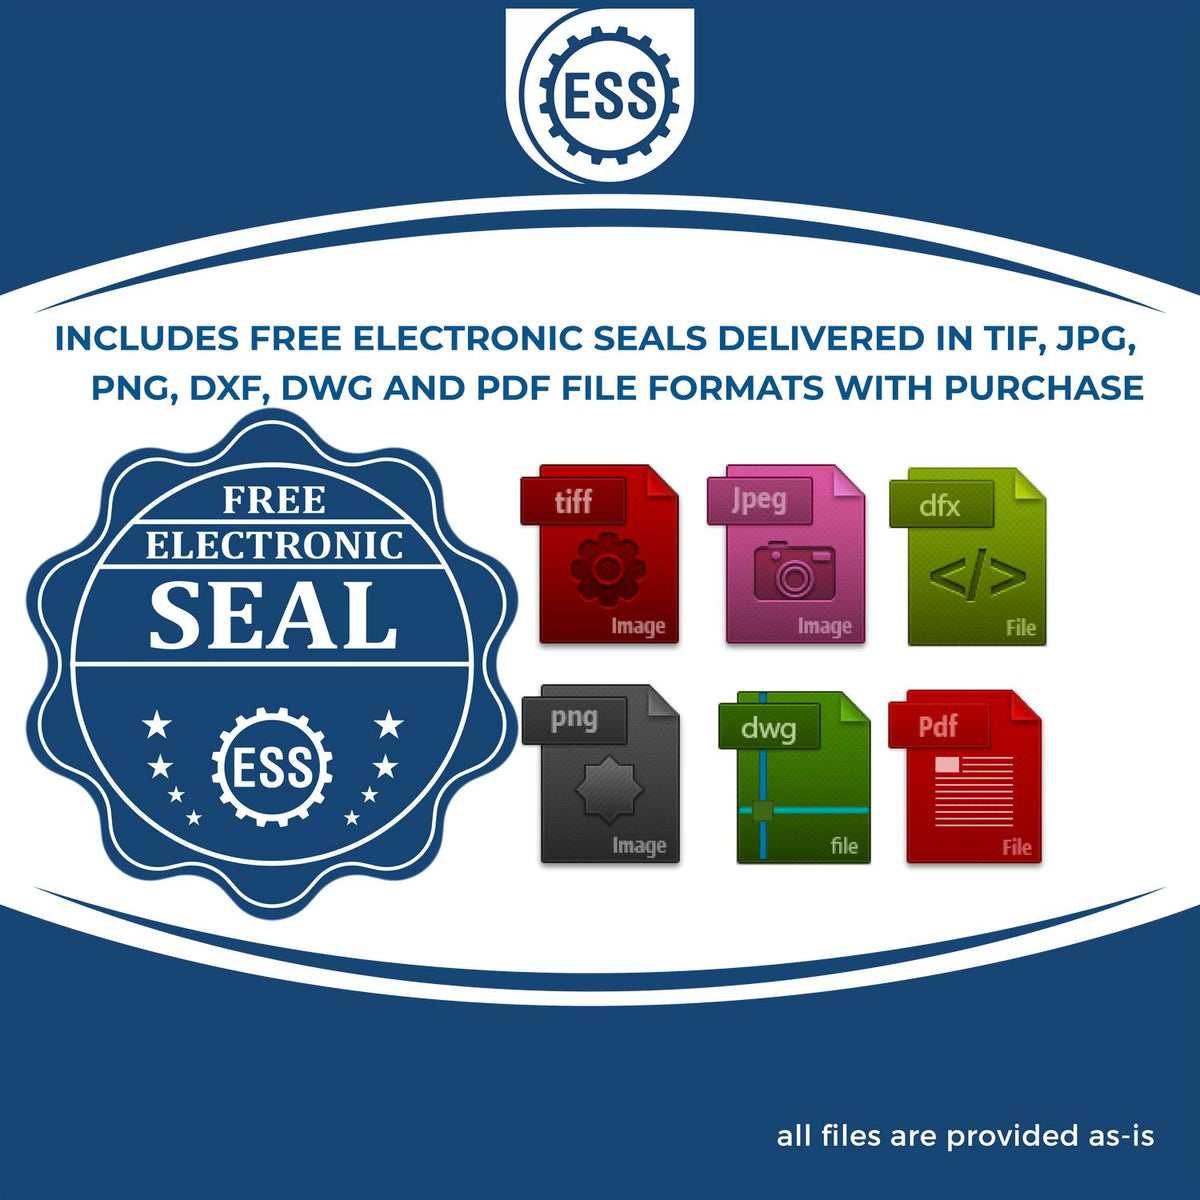 An infographic for the free electronic seal for the Soft Vermont Professional Engineer Seal illustrating the different file type icons such as DXF, DWG, TIF, JPG and PNG.